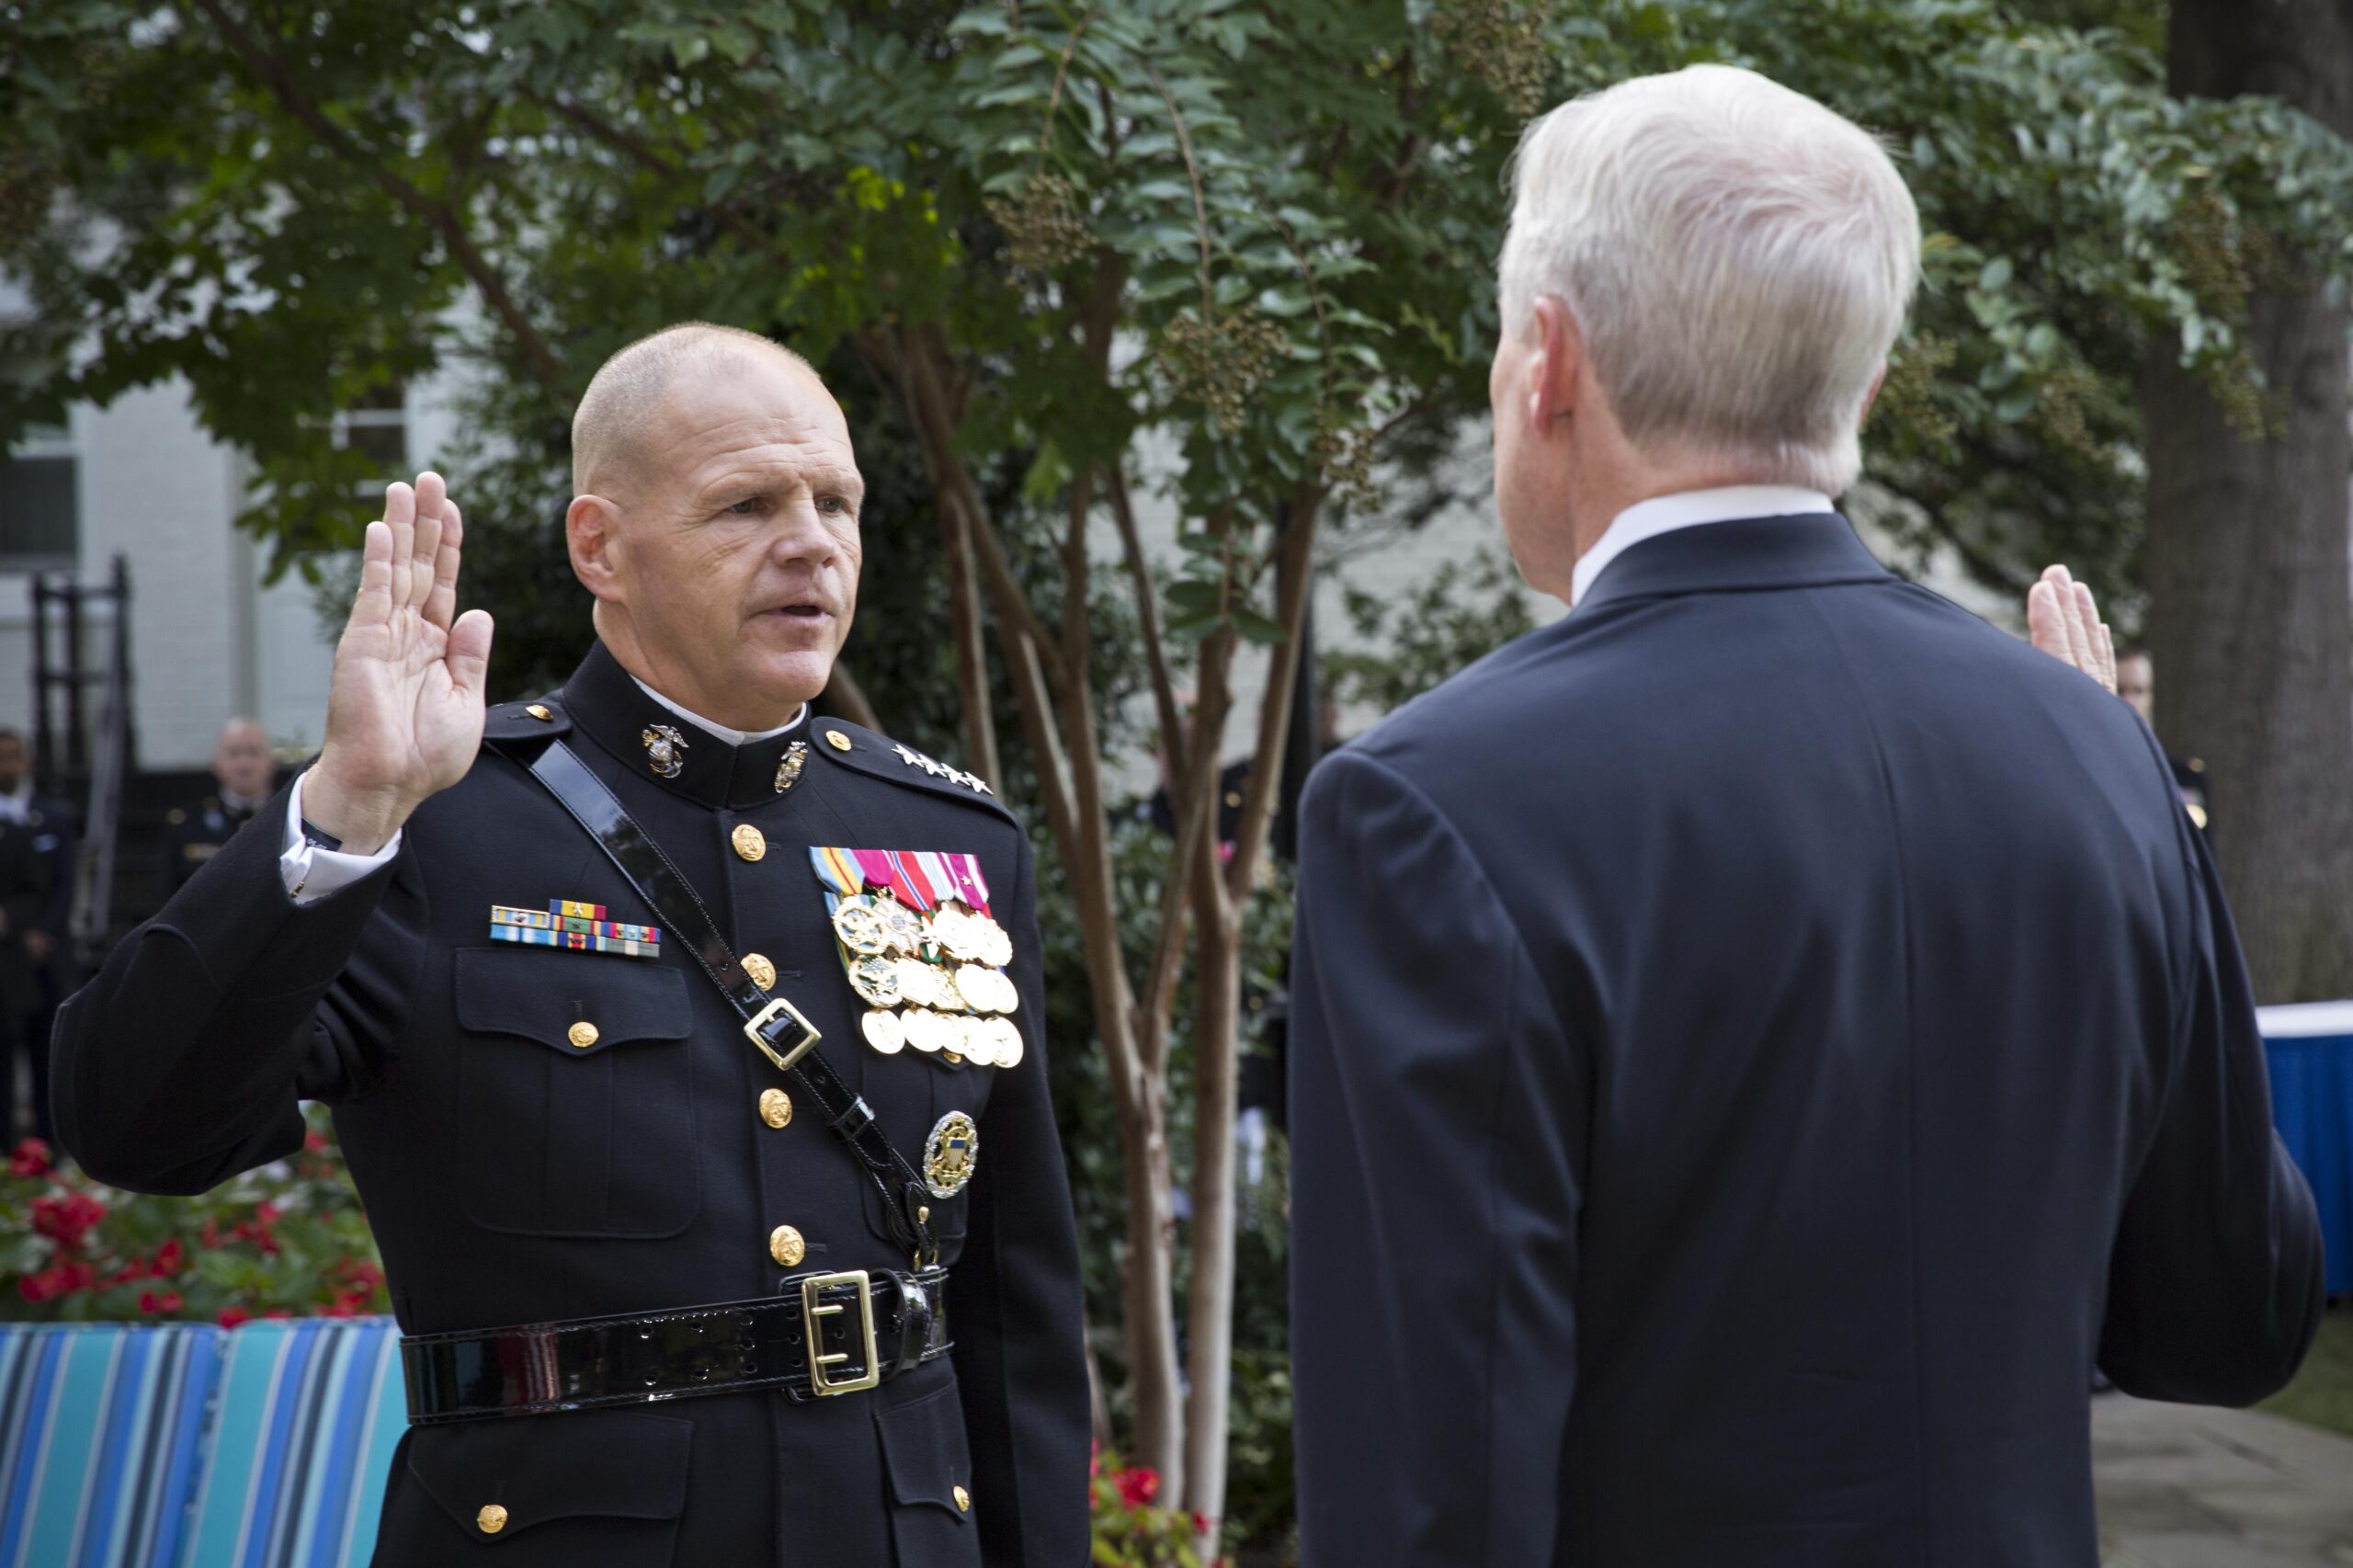 The Marine Corps Is Looking For A Few Good Nerds: Gen. Neller